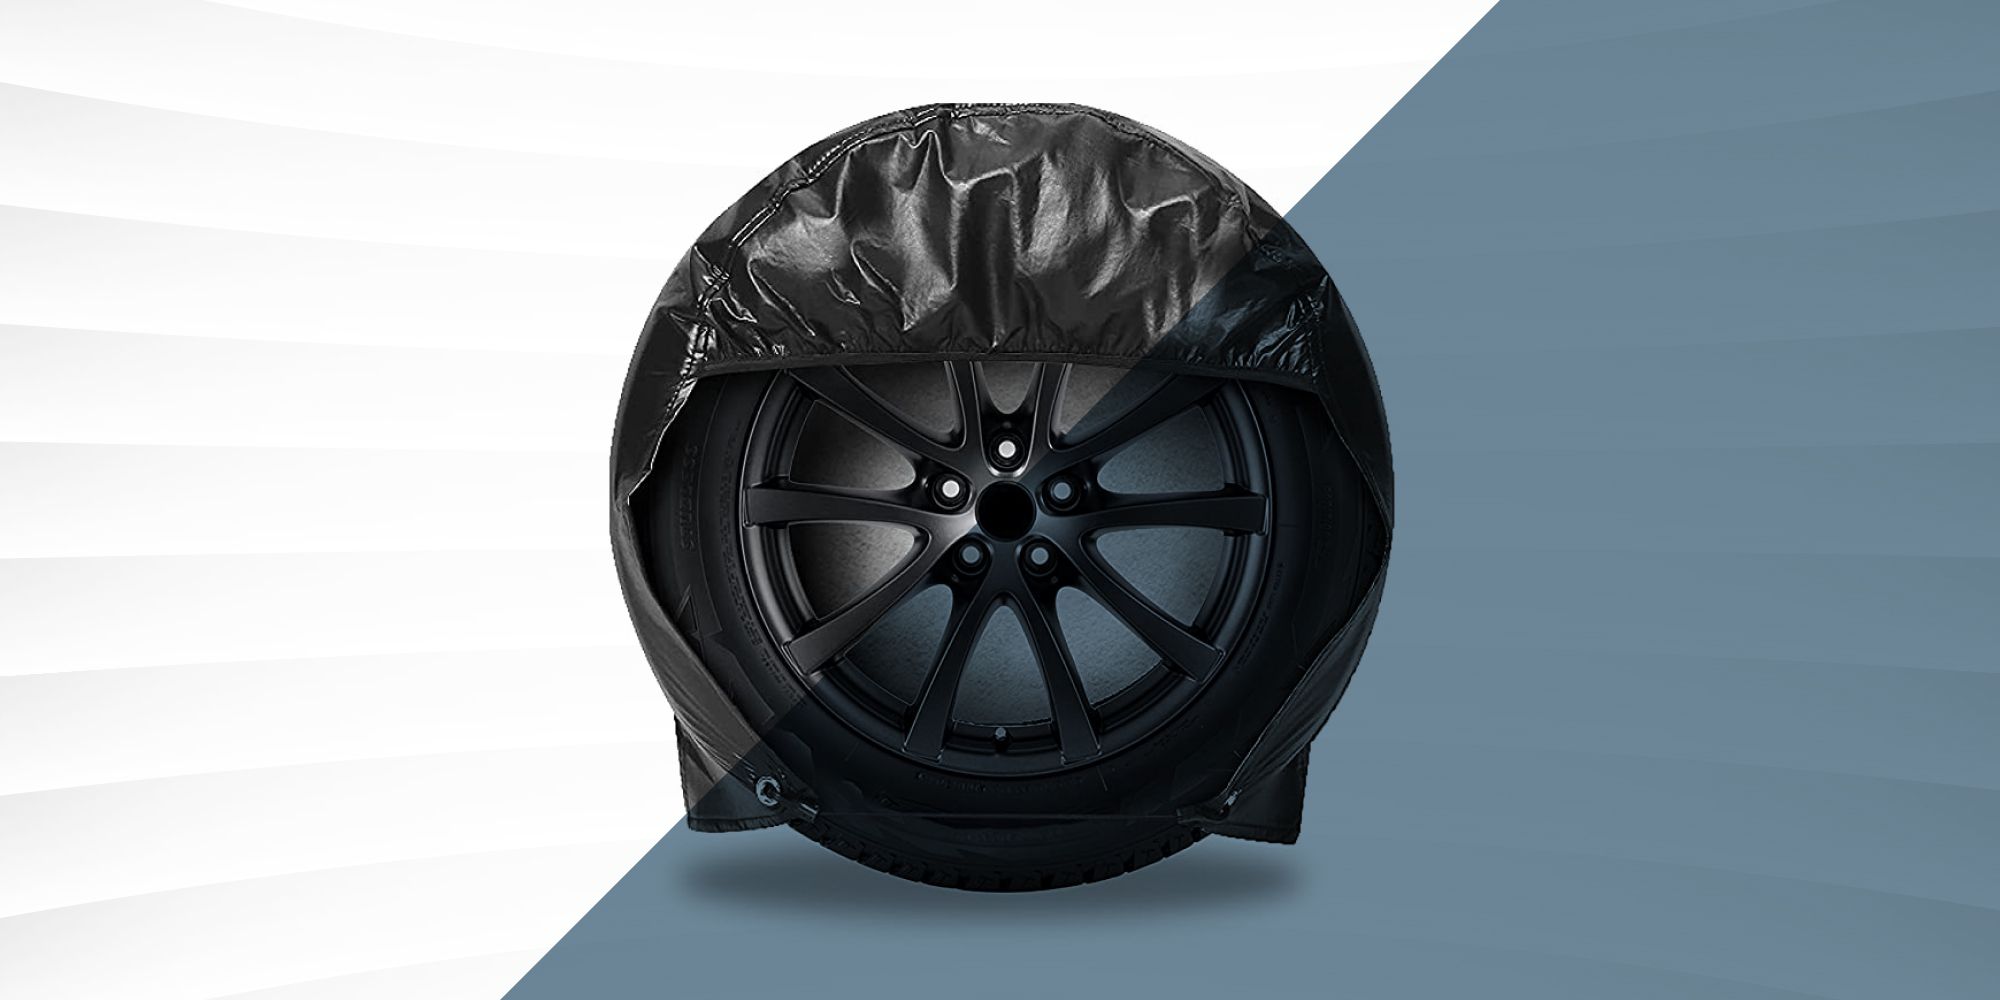 Tyre Bags Tyre Wheel Covers Protect Your Wheels Against Wear and Tear and your roof from dirt Reifen Set of 4 for Changing Tyres Suitable for all tyres up to 22 inches Very Strong and robust 